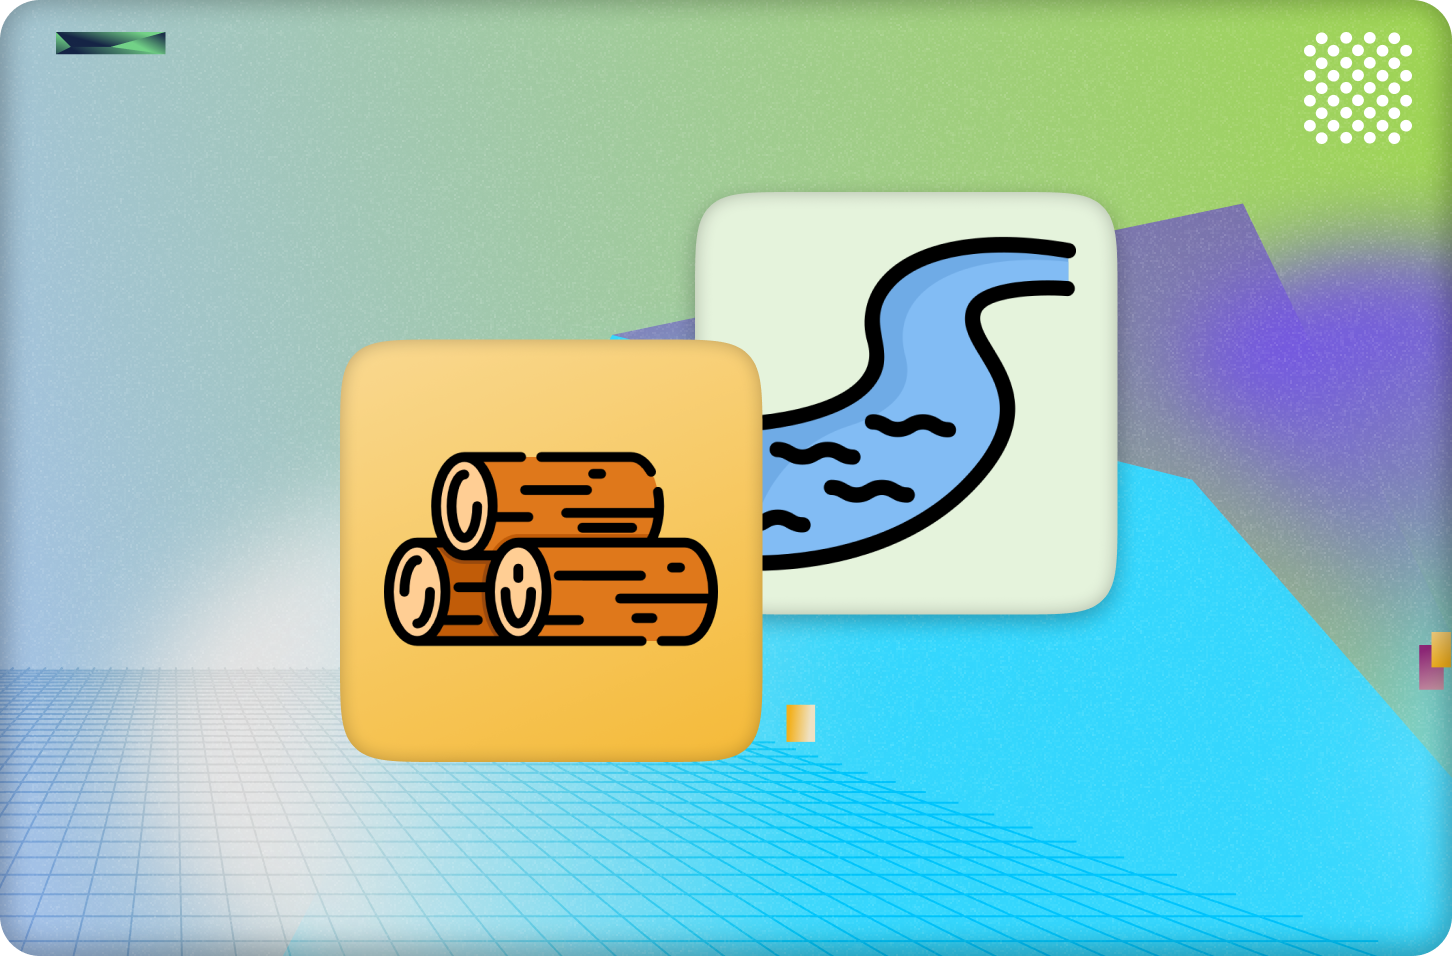 icon of logs and then icon of a stream, to represent log streaming!